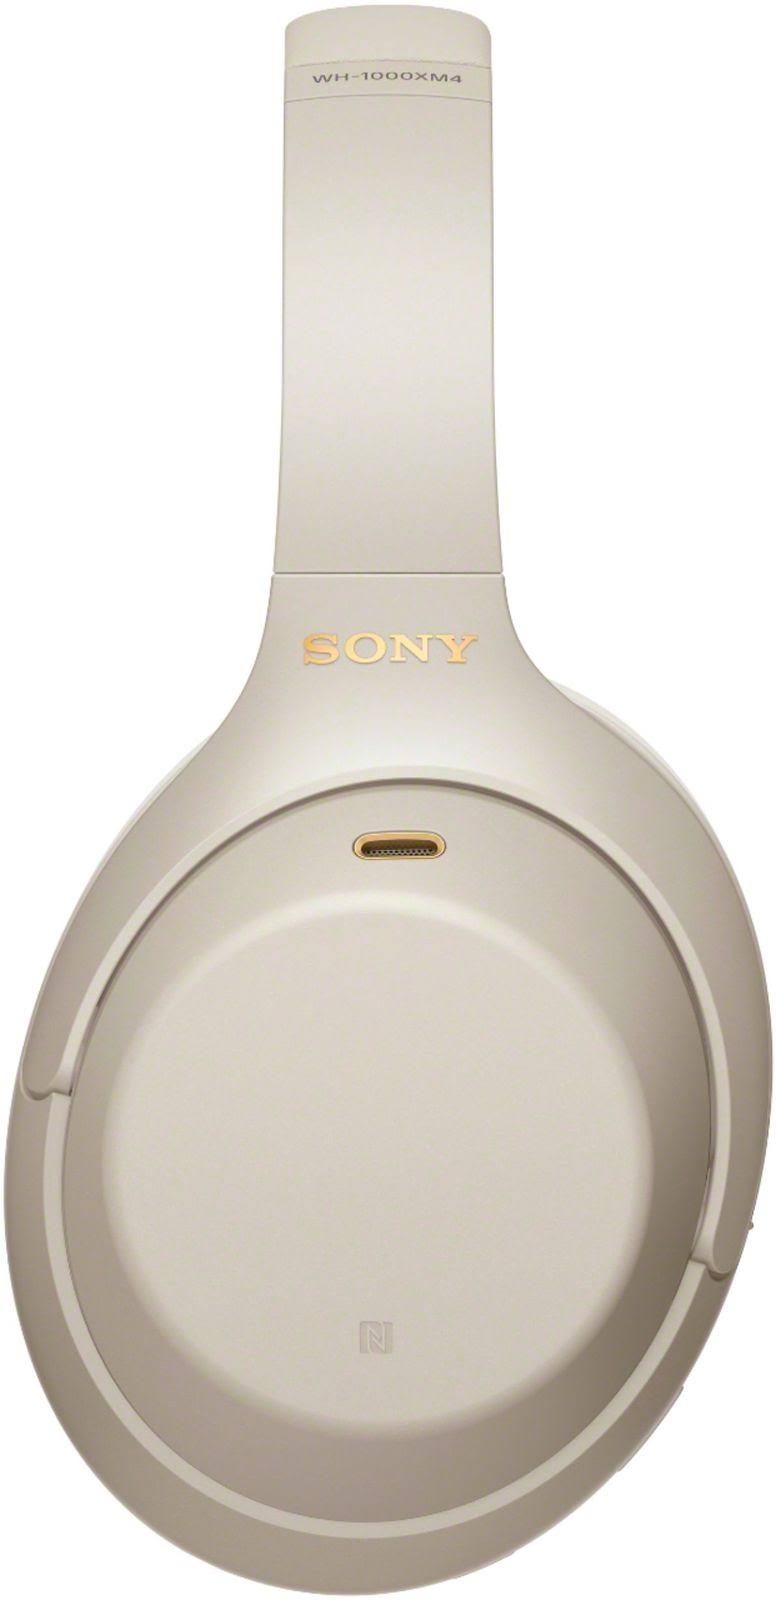 Sony WH-1000XM4 Wireless Noise Canceling Over-Ear Headphones (Silver)